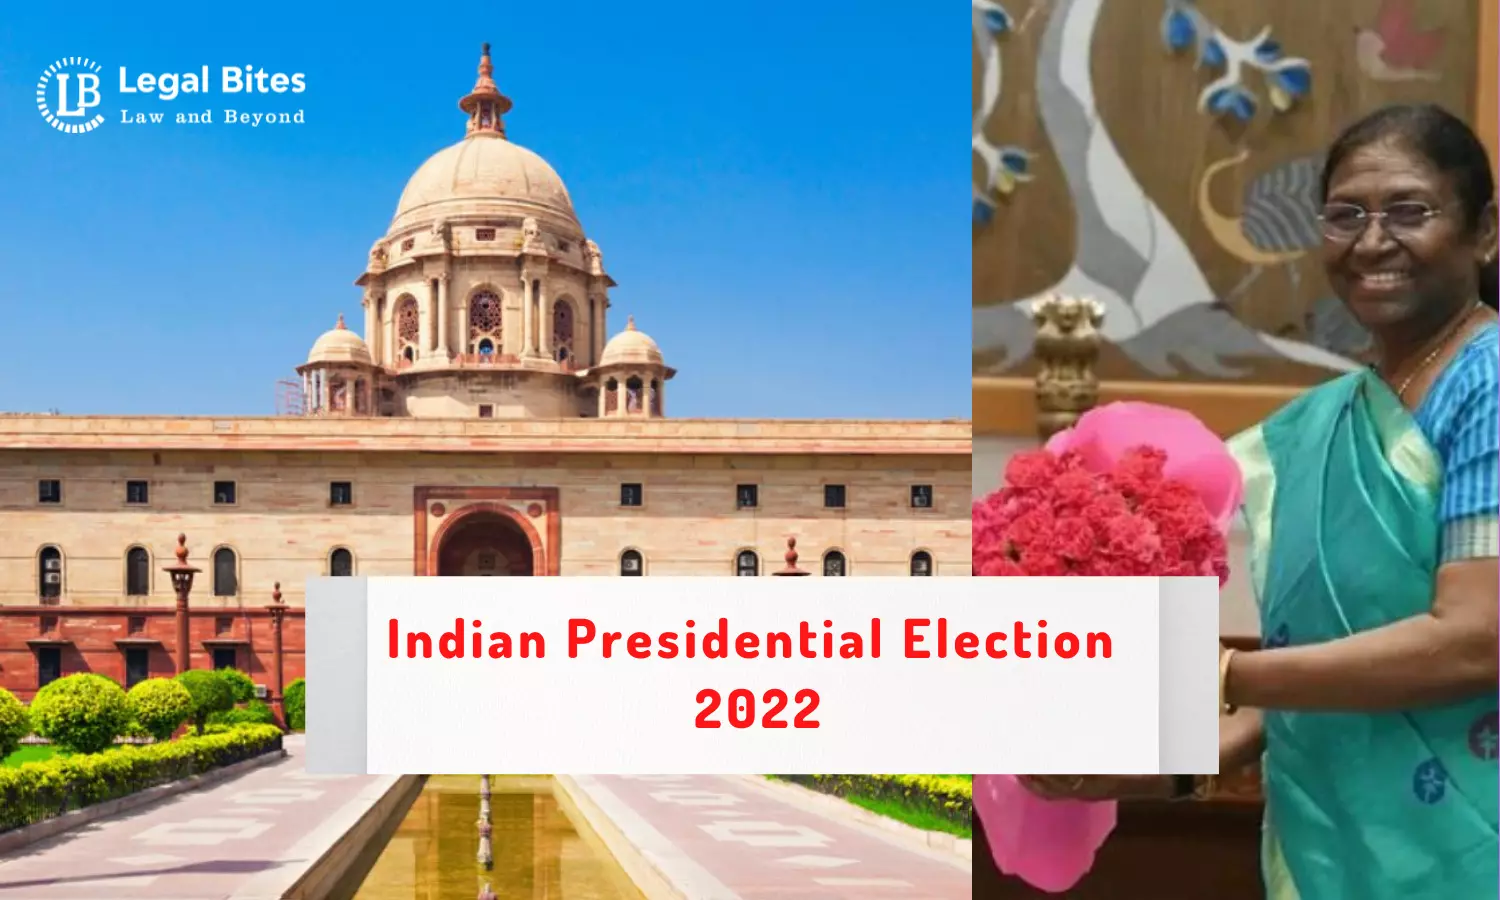 Indian Presidential Election, 2022